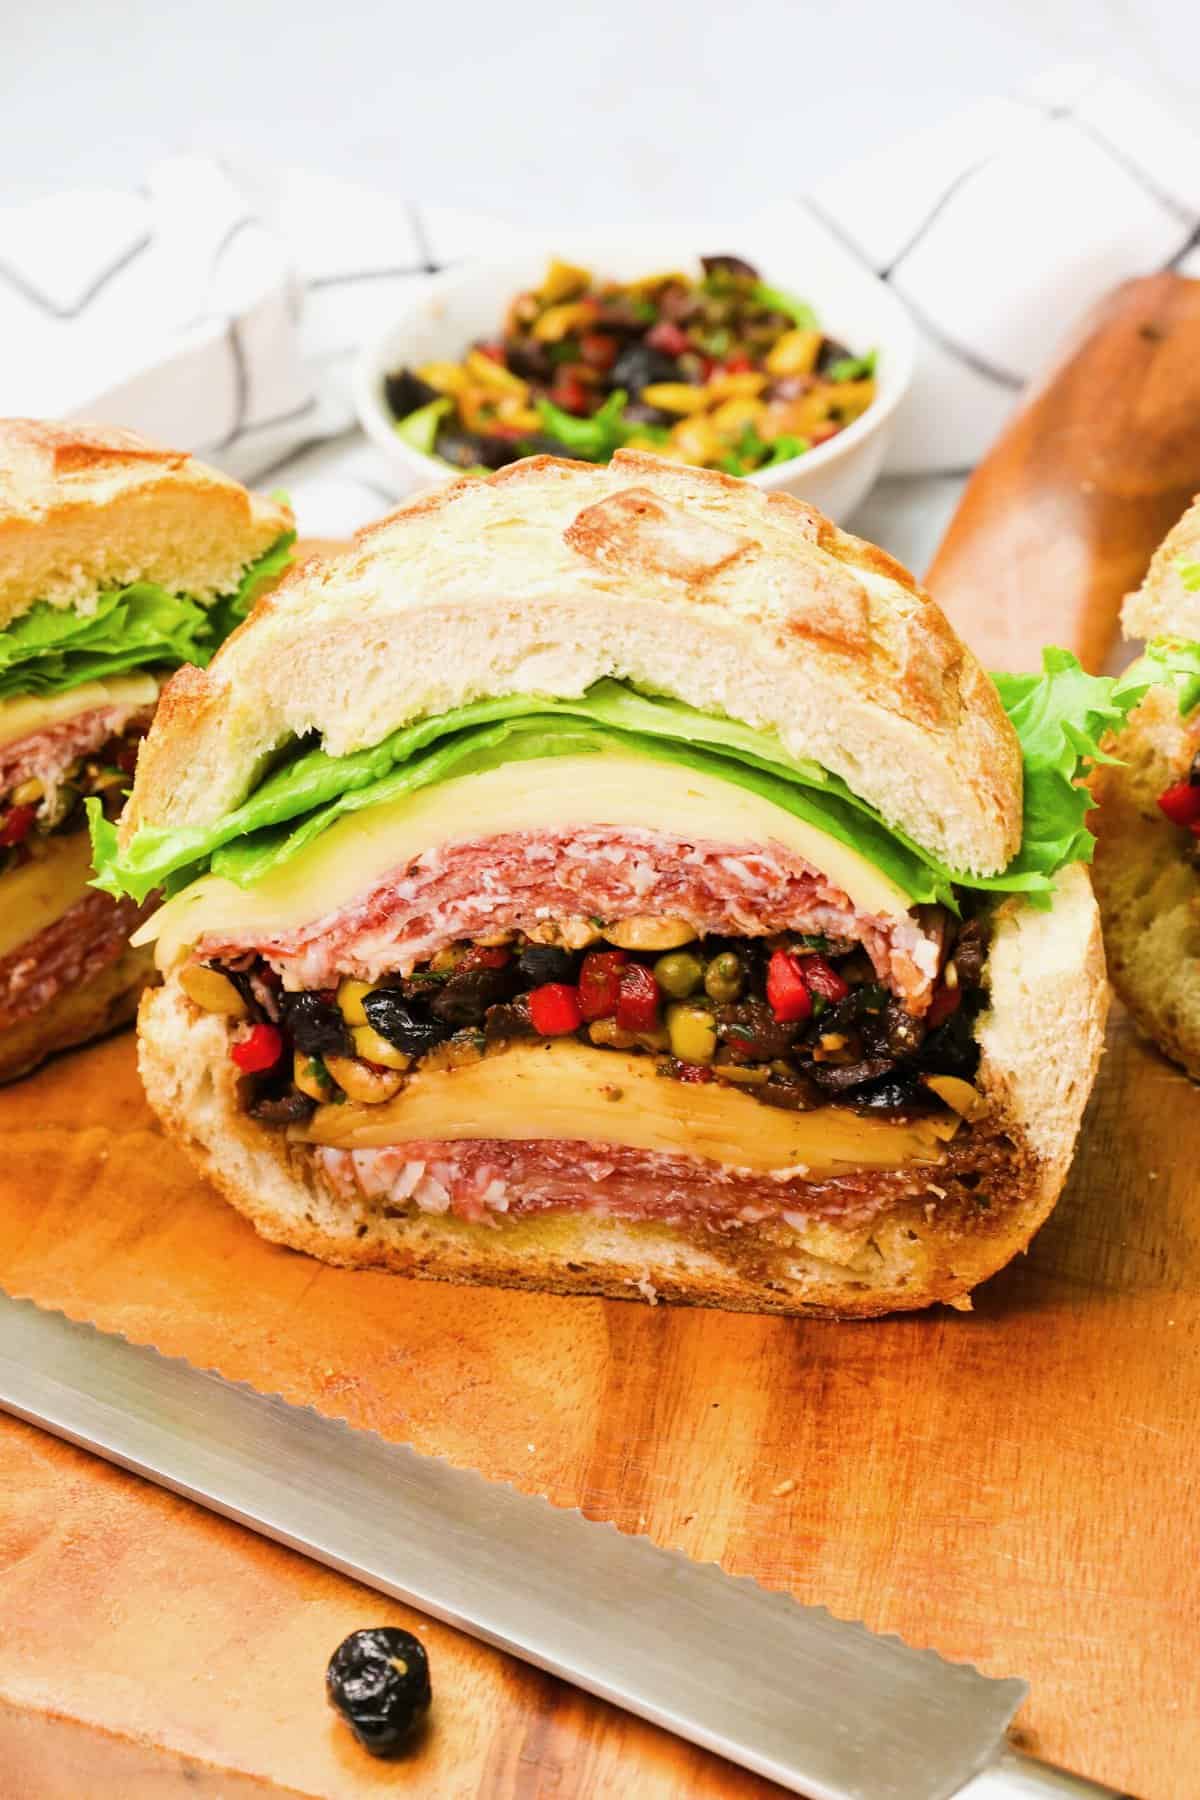 An insider's take on crazy delicious muffaletta sandwiches